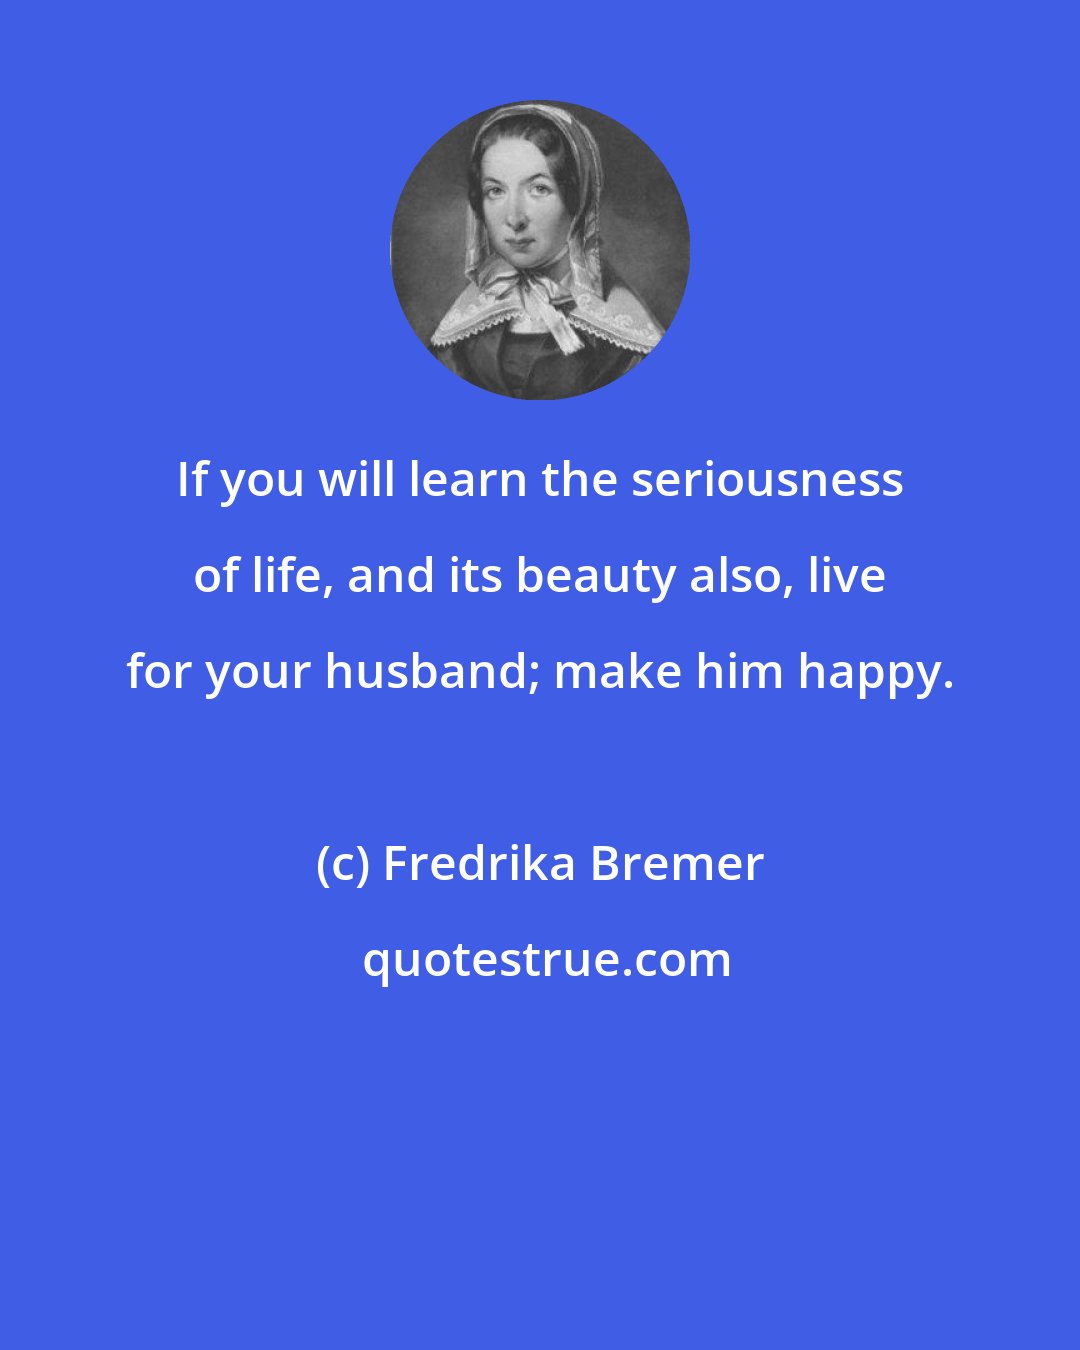 Fredrika Bremer: If you will learn the seriousness of life, and its beauty also, live for your husband; make him happy.